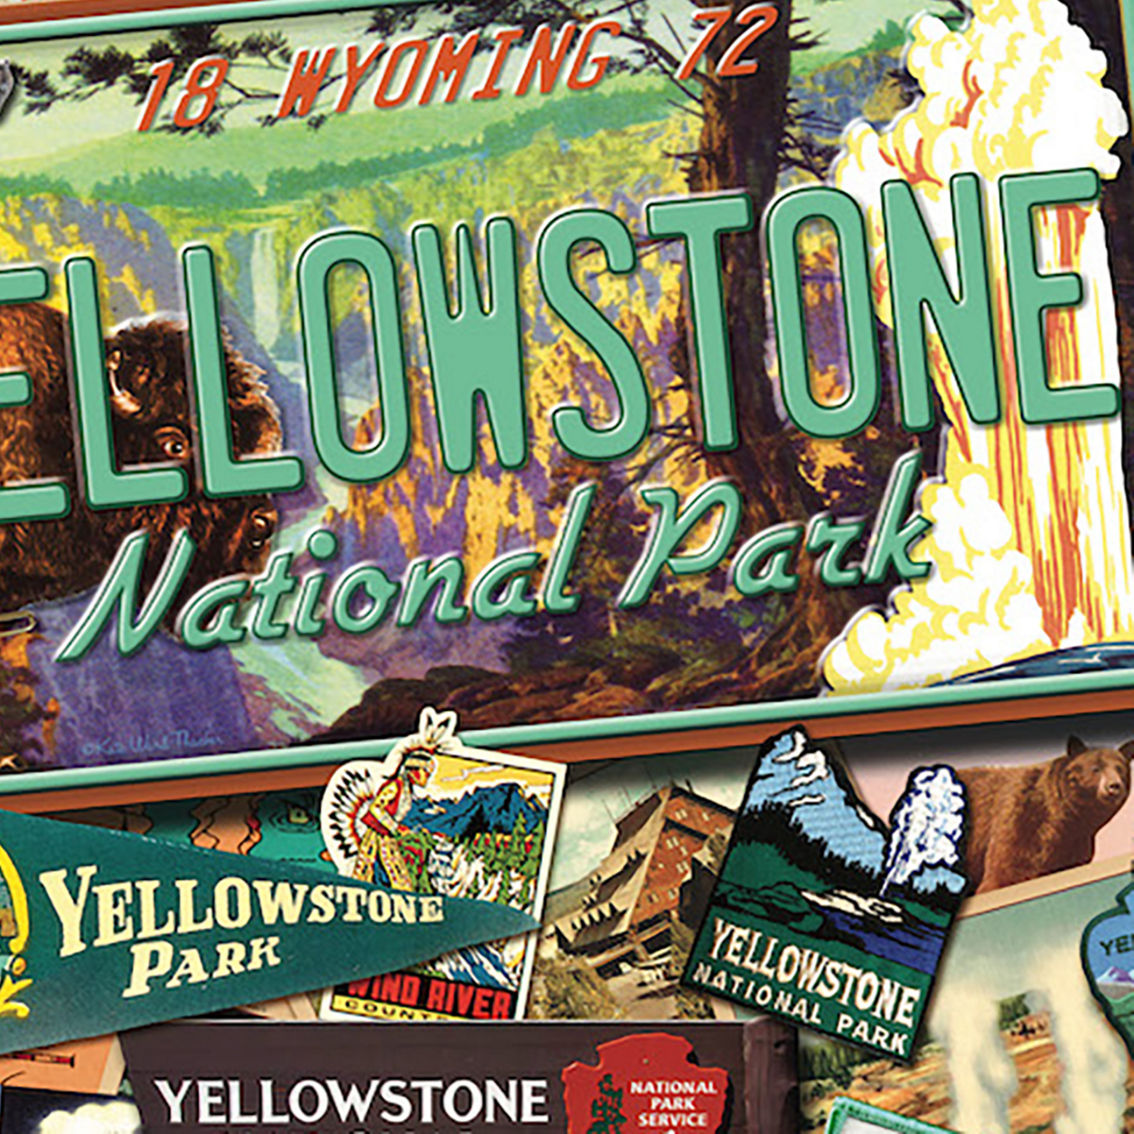 Hart Puzzles Yellowstone National Park 1000 pc. Puzzle - Image 5 of 6